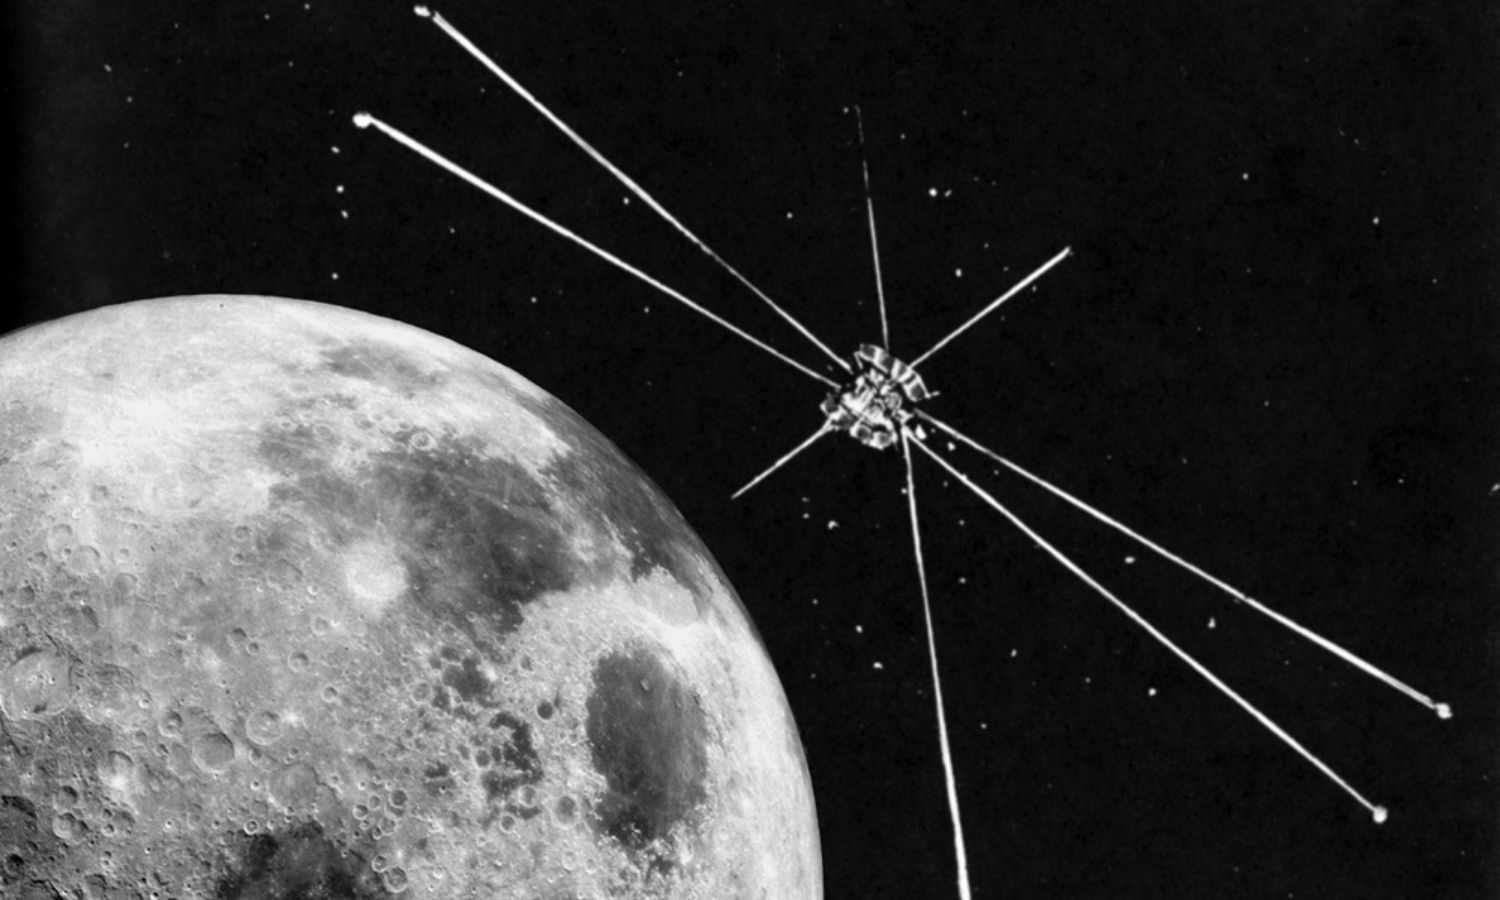 OTD in 1973: NASA's Explorer 49 was launched into Earth's orbit to research long-range radio waves within the Milky Way.